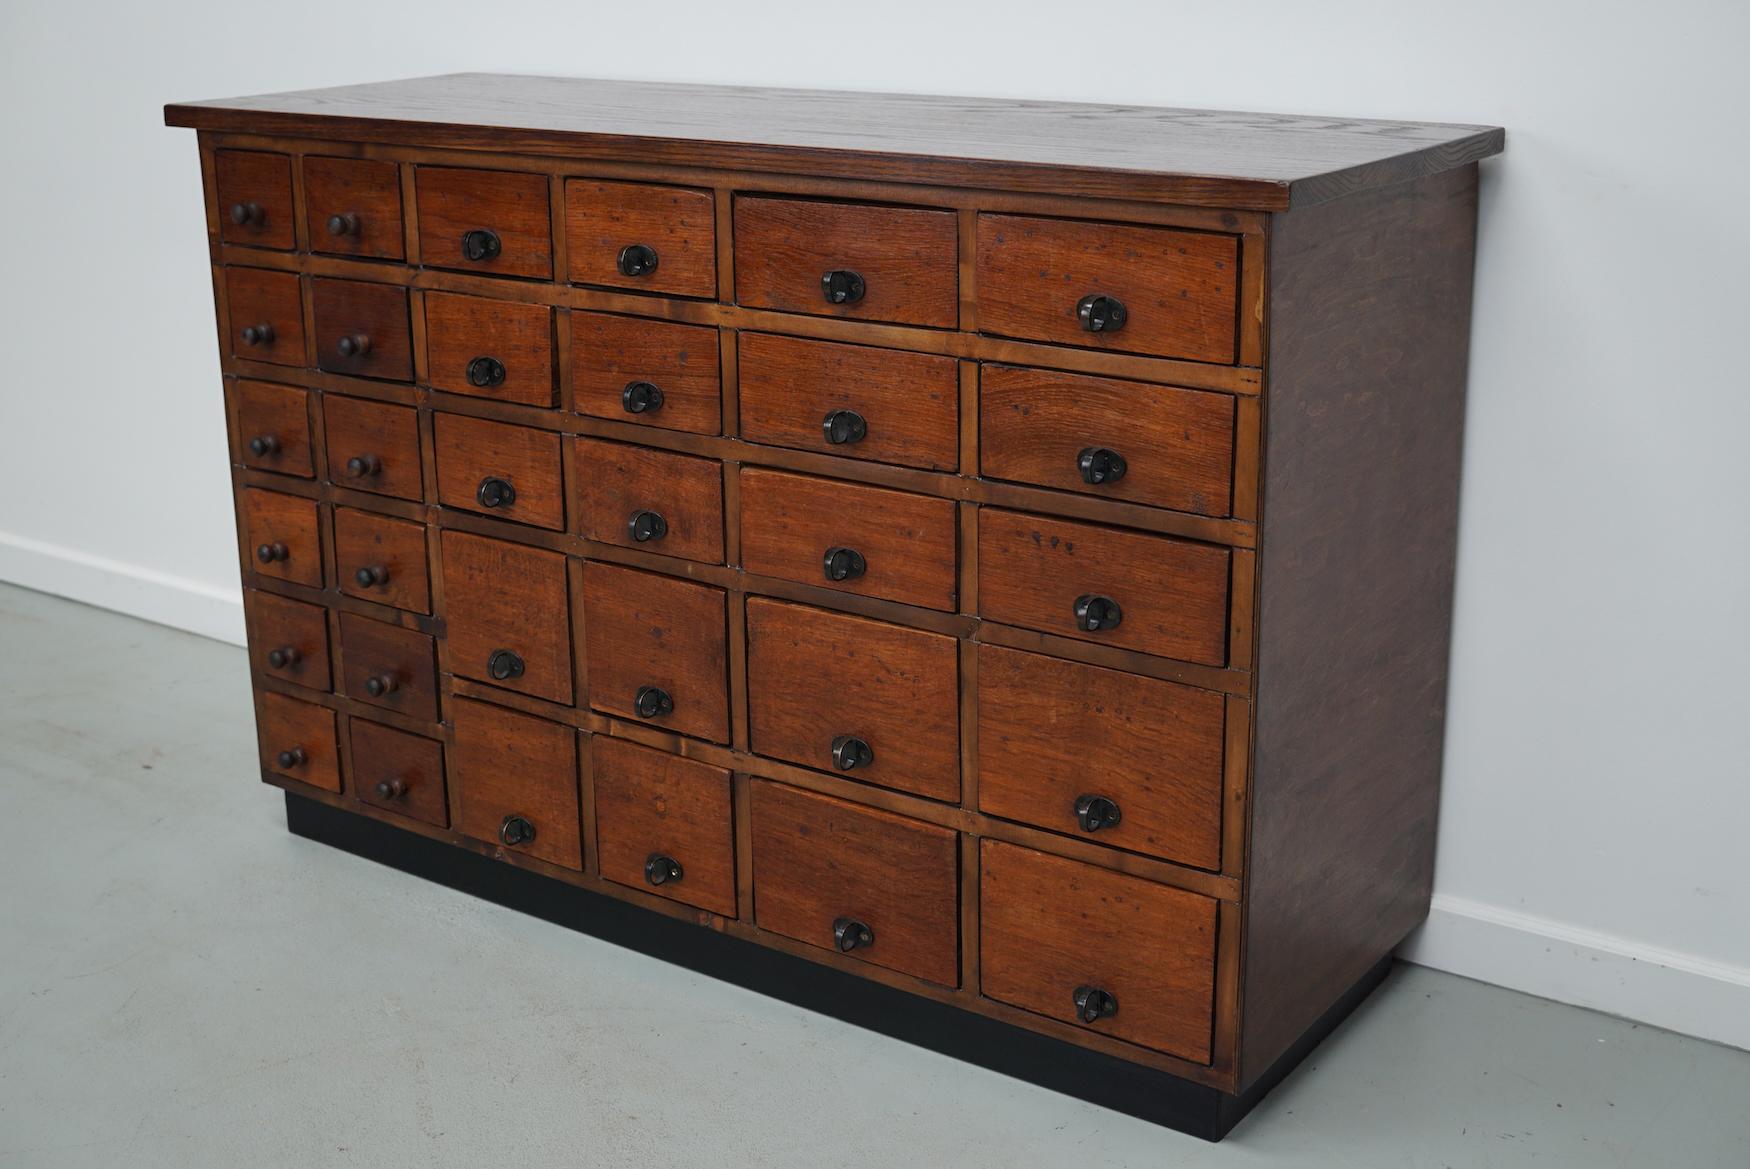 This jewelers / watchmaker cabinet was designed and made circa 1930/1940 in the Netherlands. It features 32 oak fronted drawers in many different sizes.